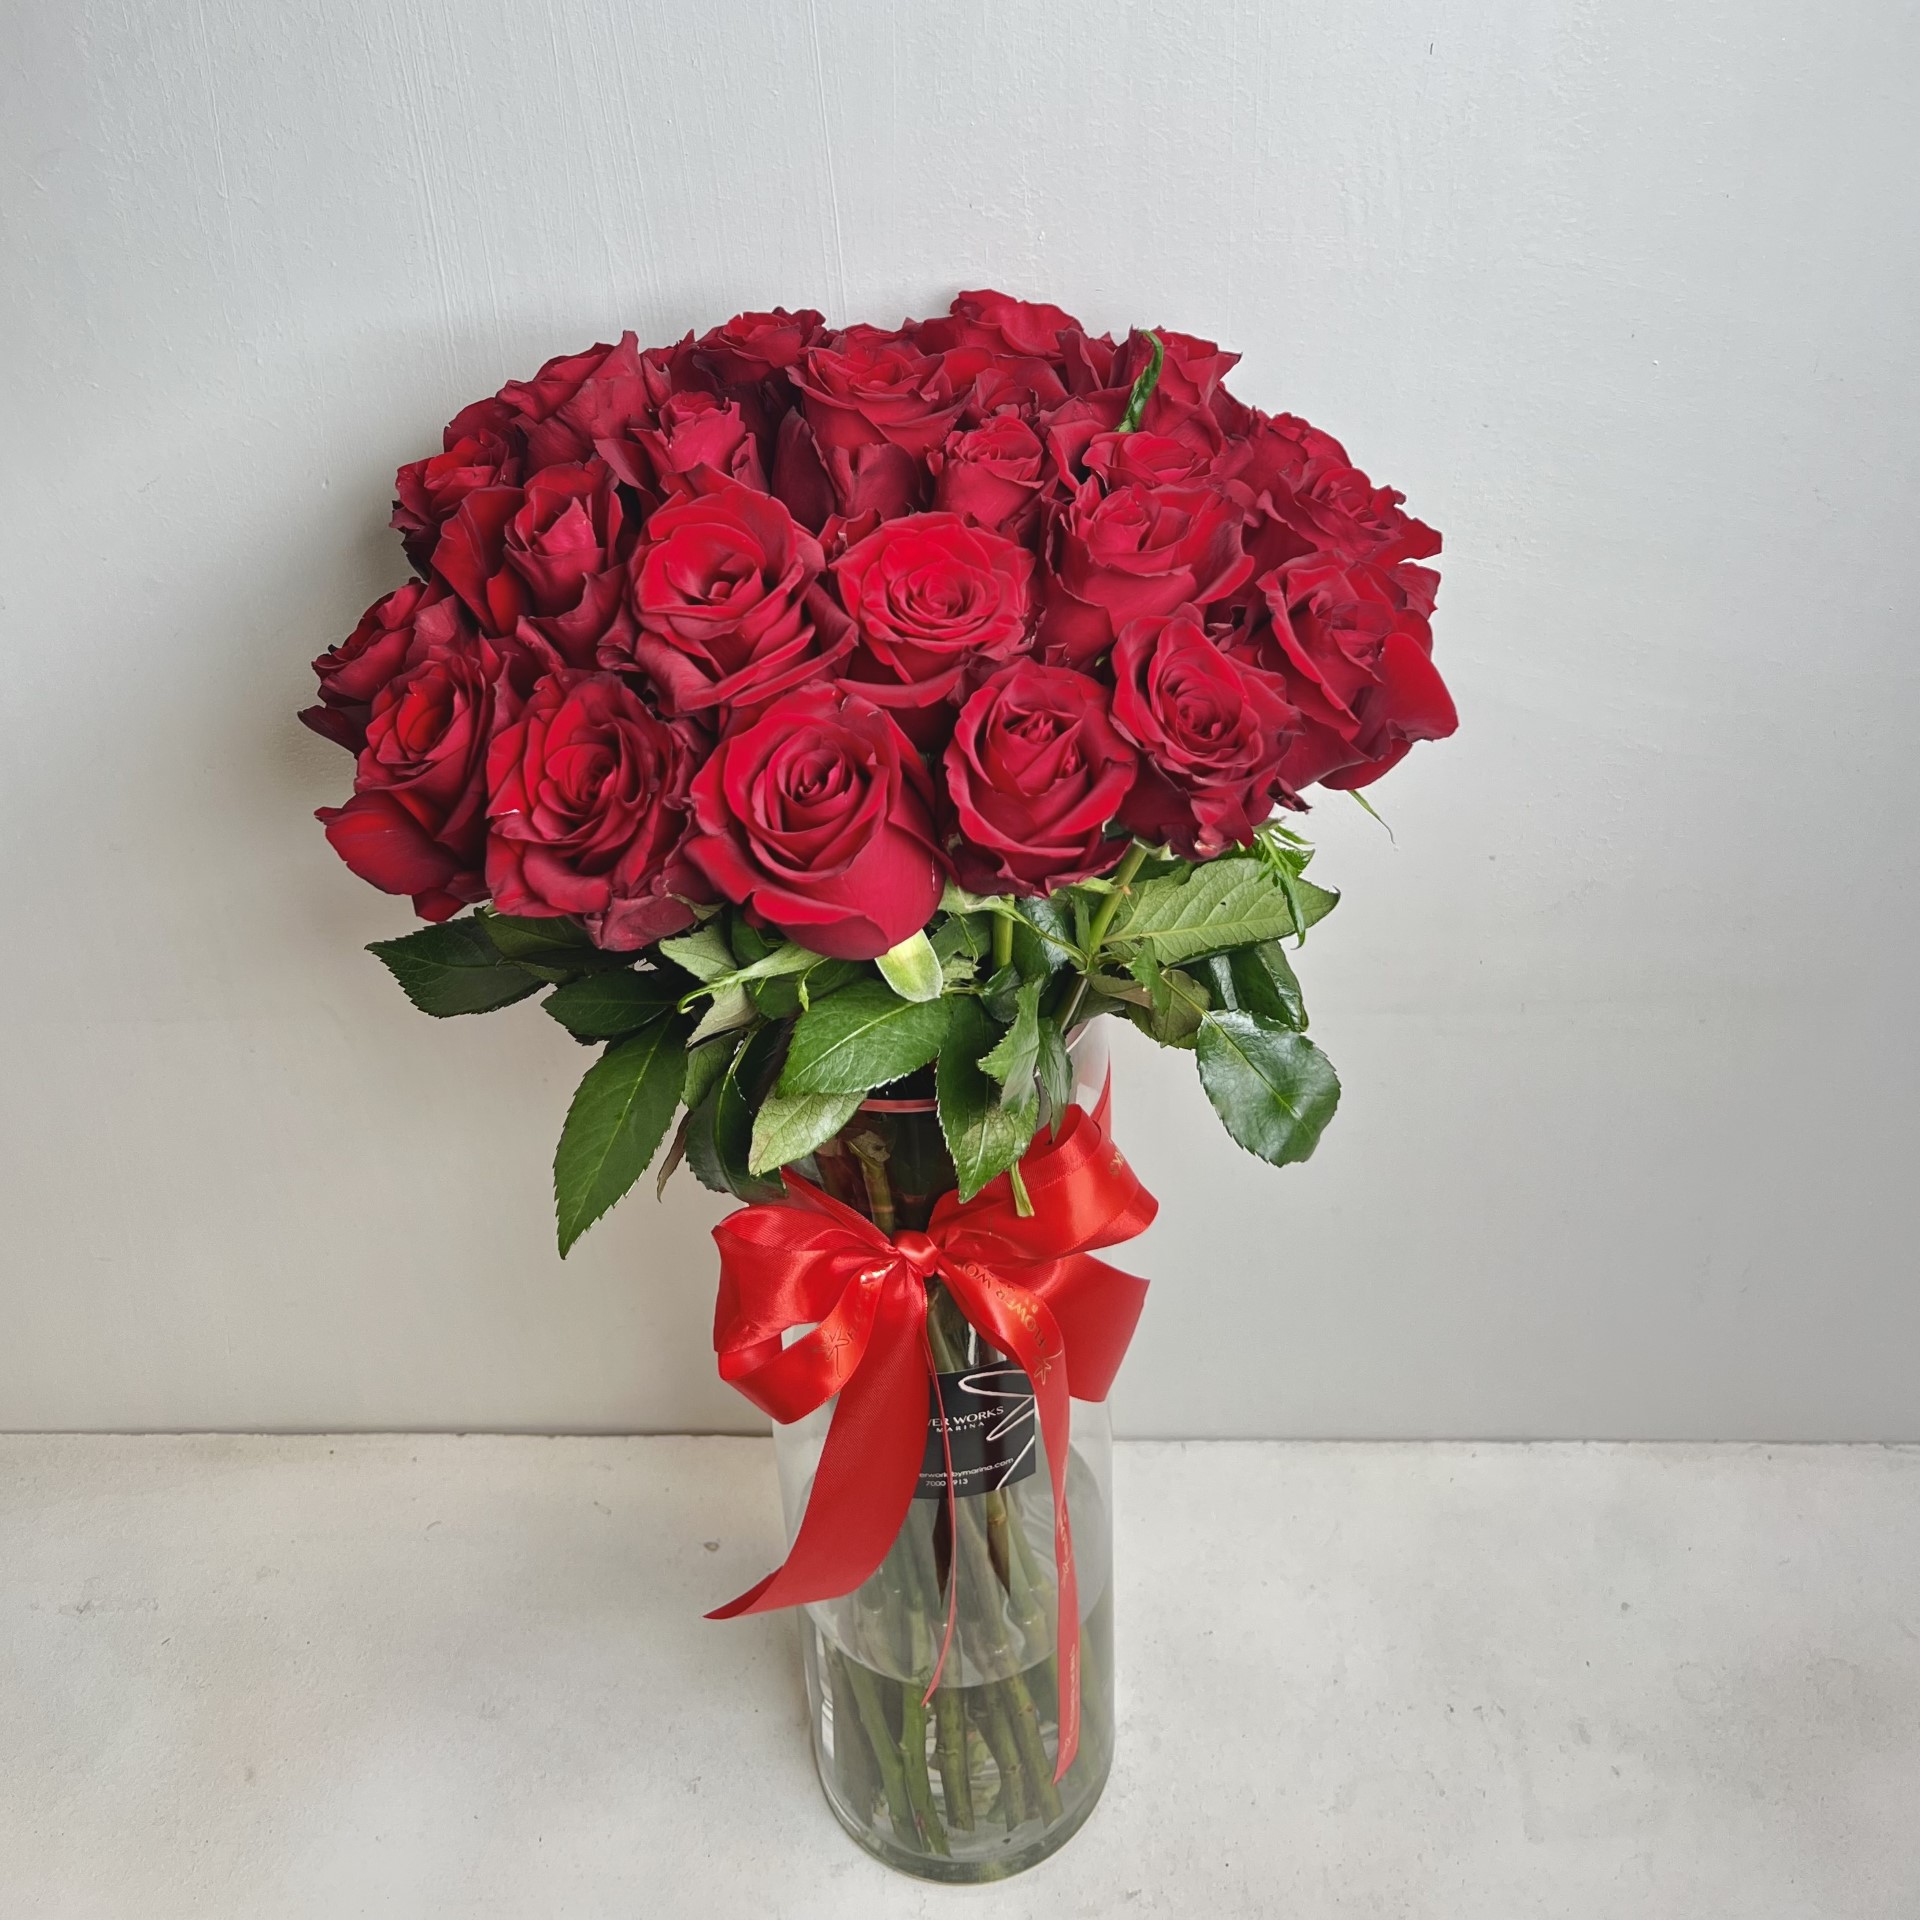 RED ROSES IN A VASE